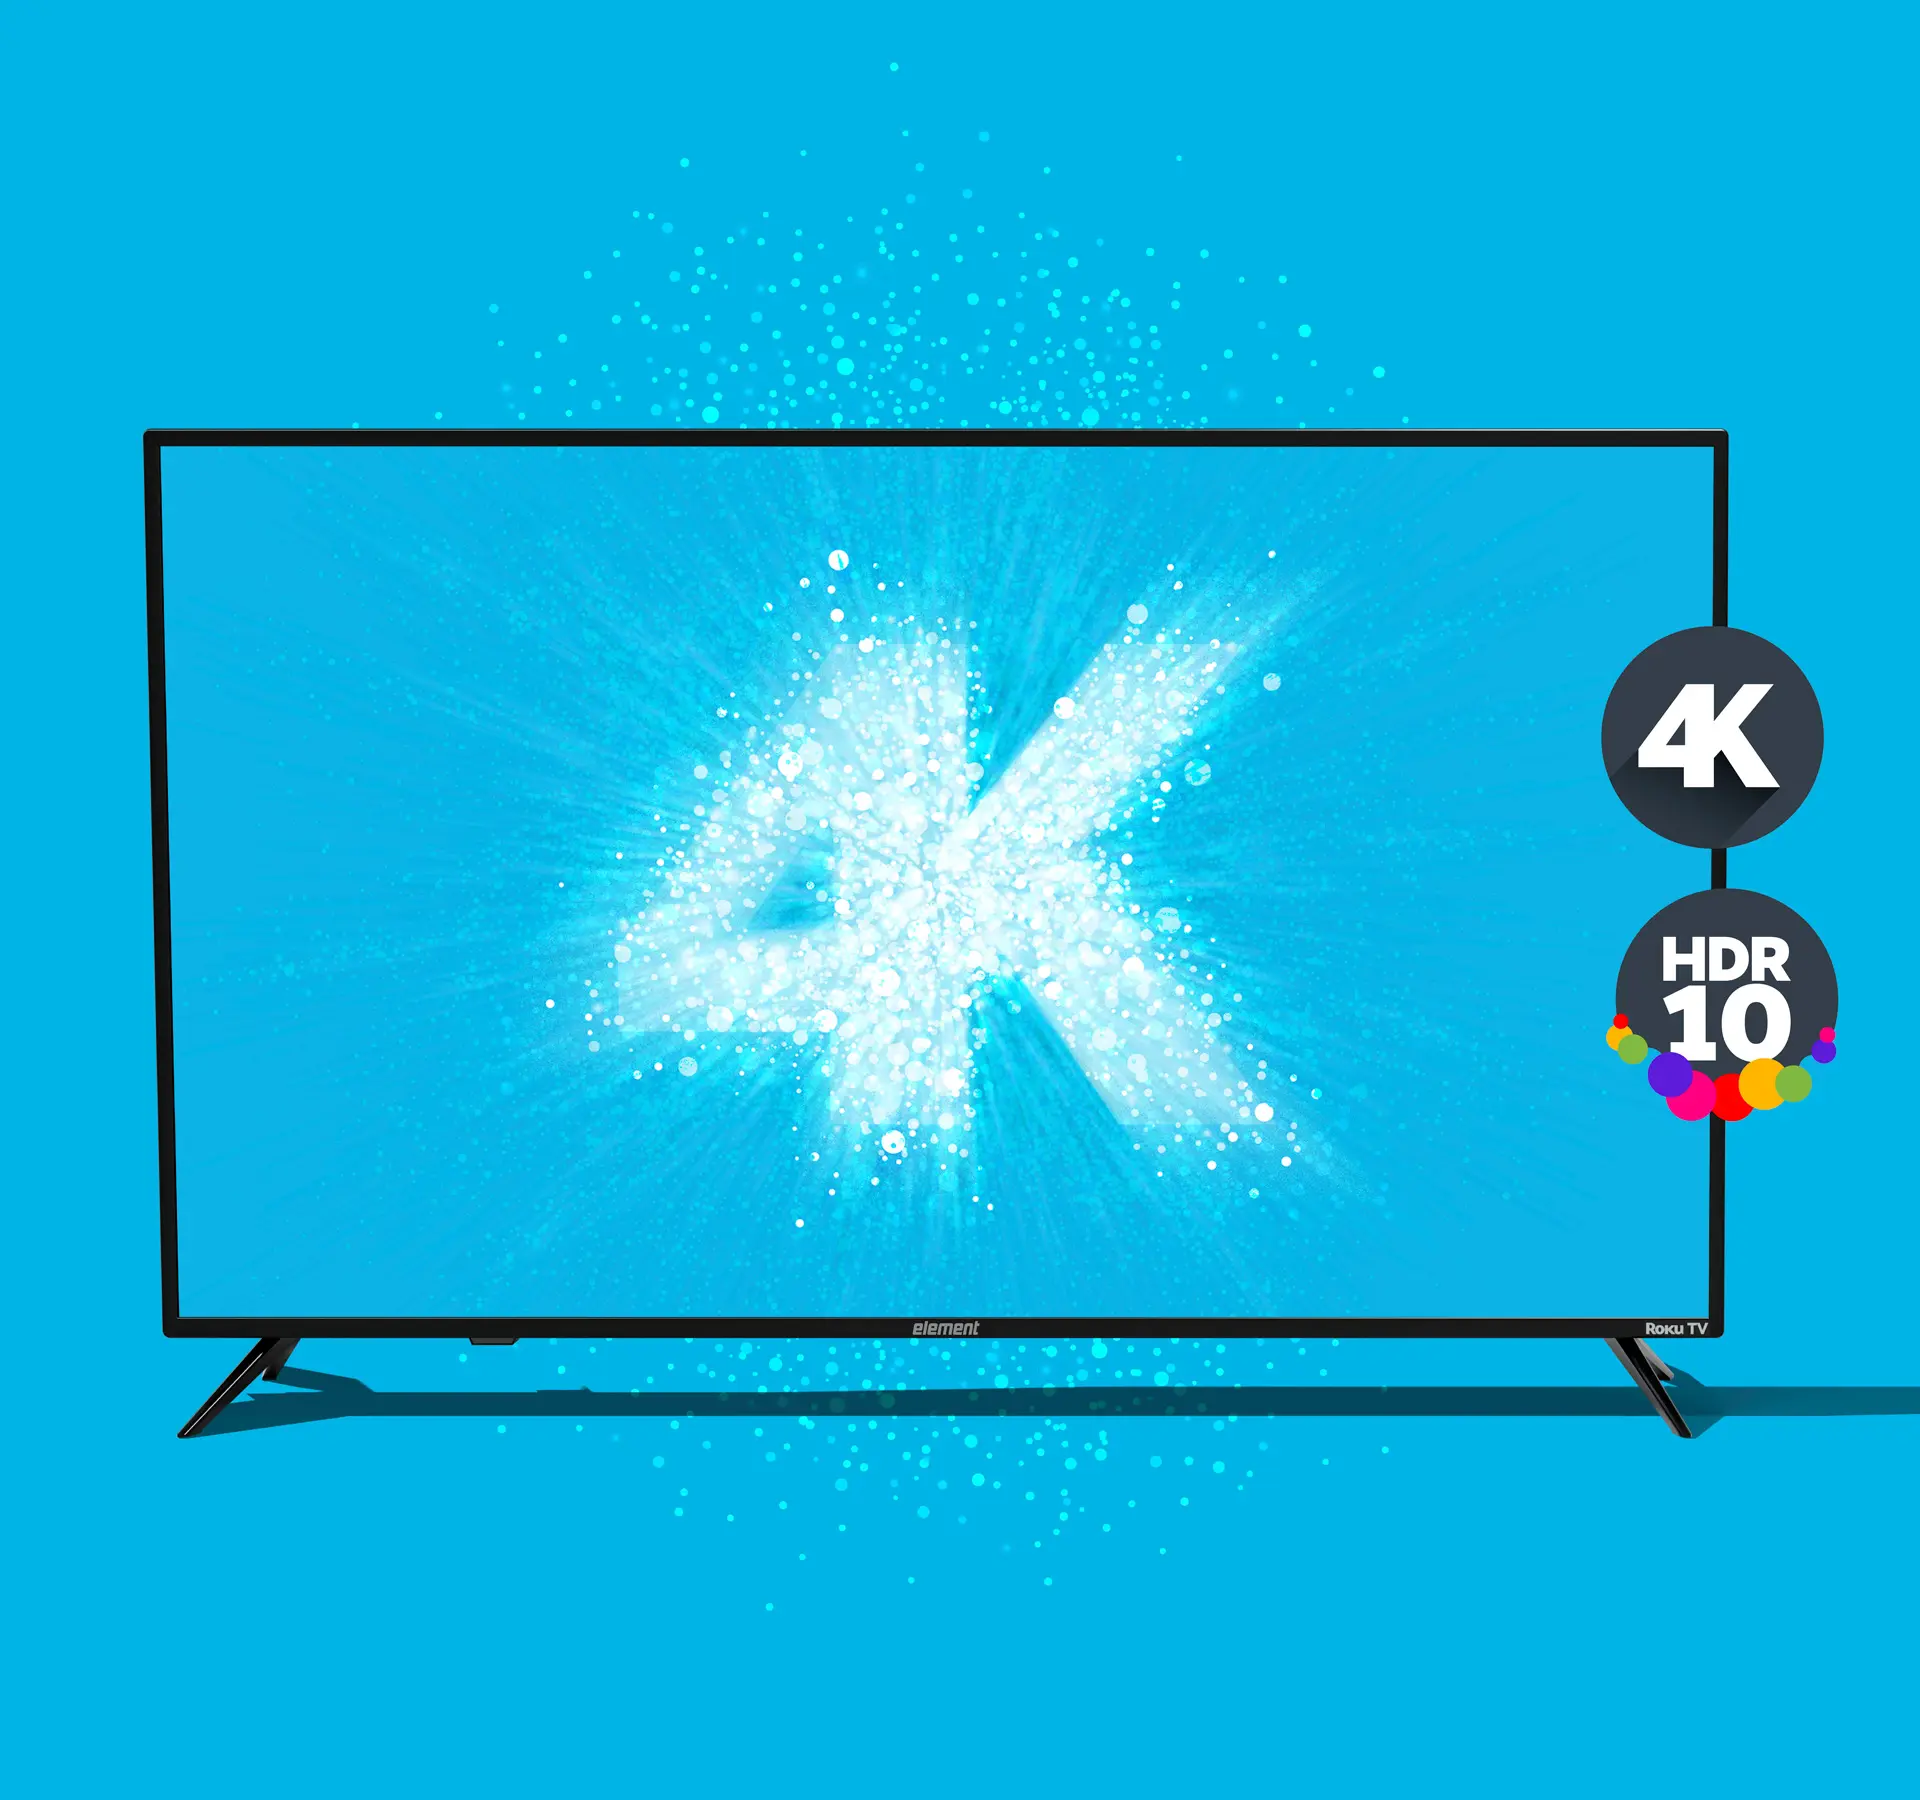 TV image with 4K graphic